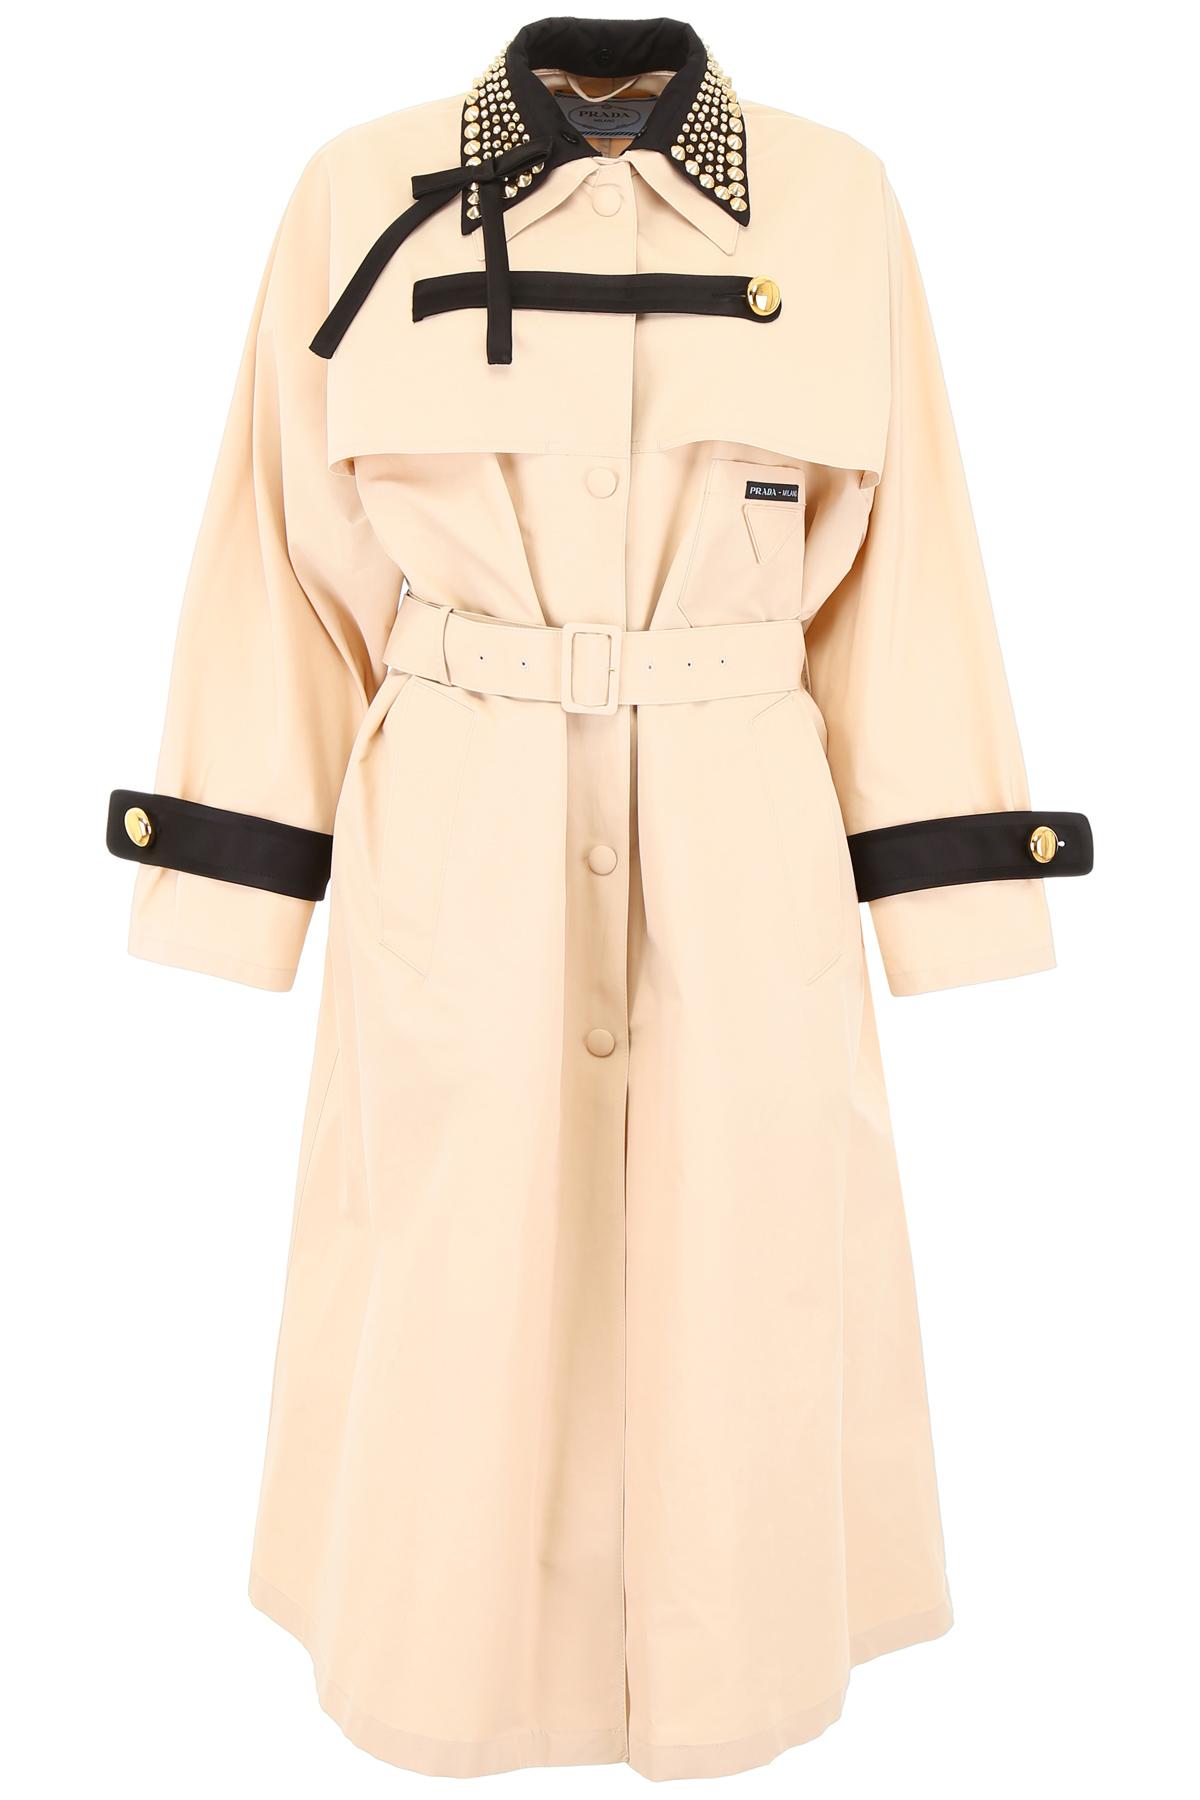 Prada Cotton Trench Coat With Studs in Beige (Natural) | Lyst